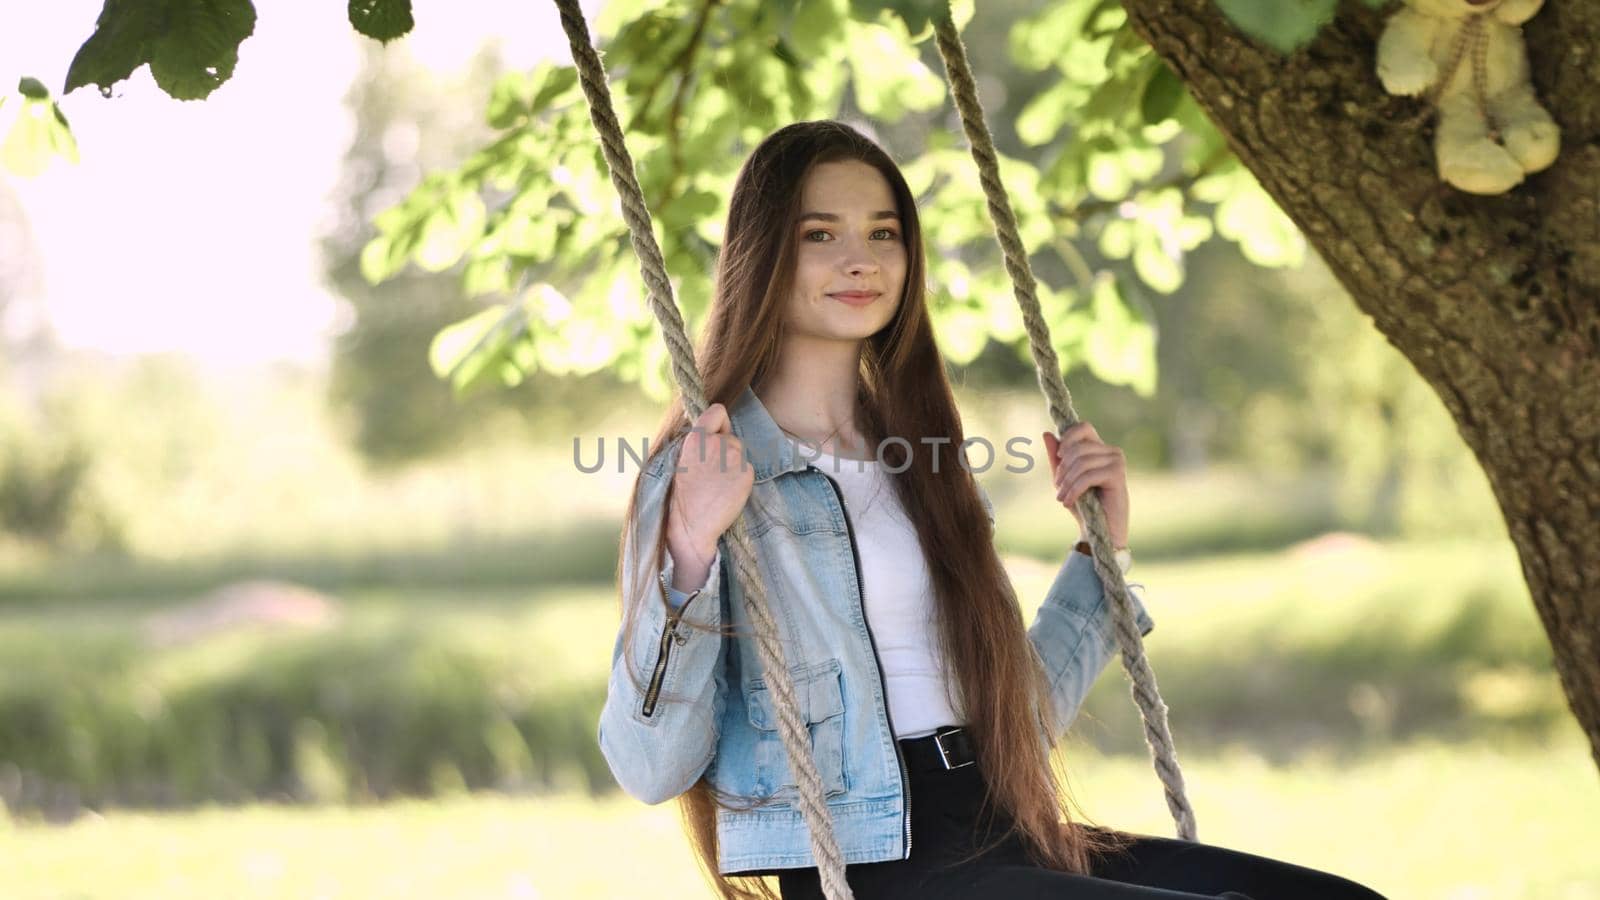 Young beautiful long-haired girl on a rope swing